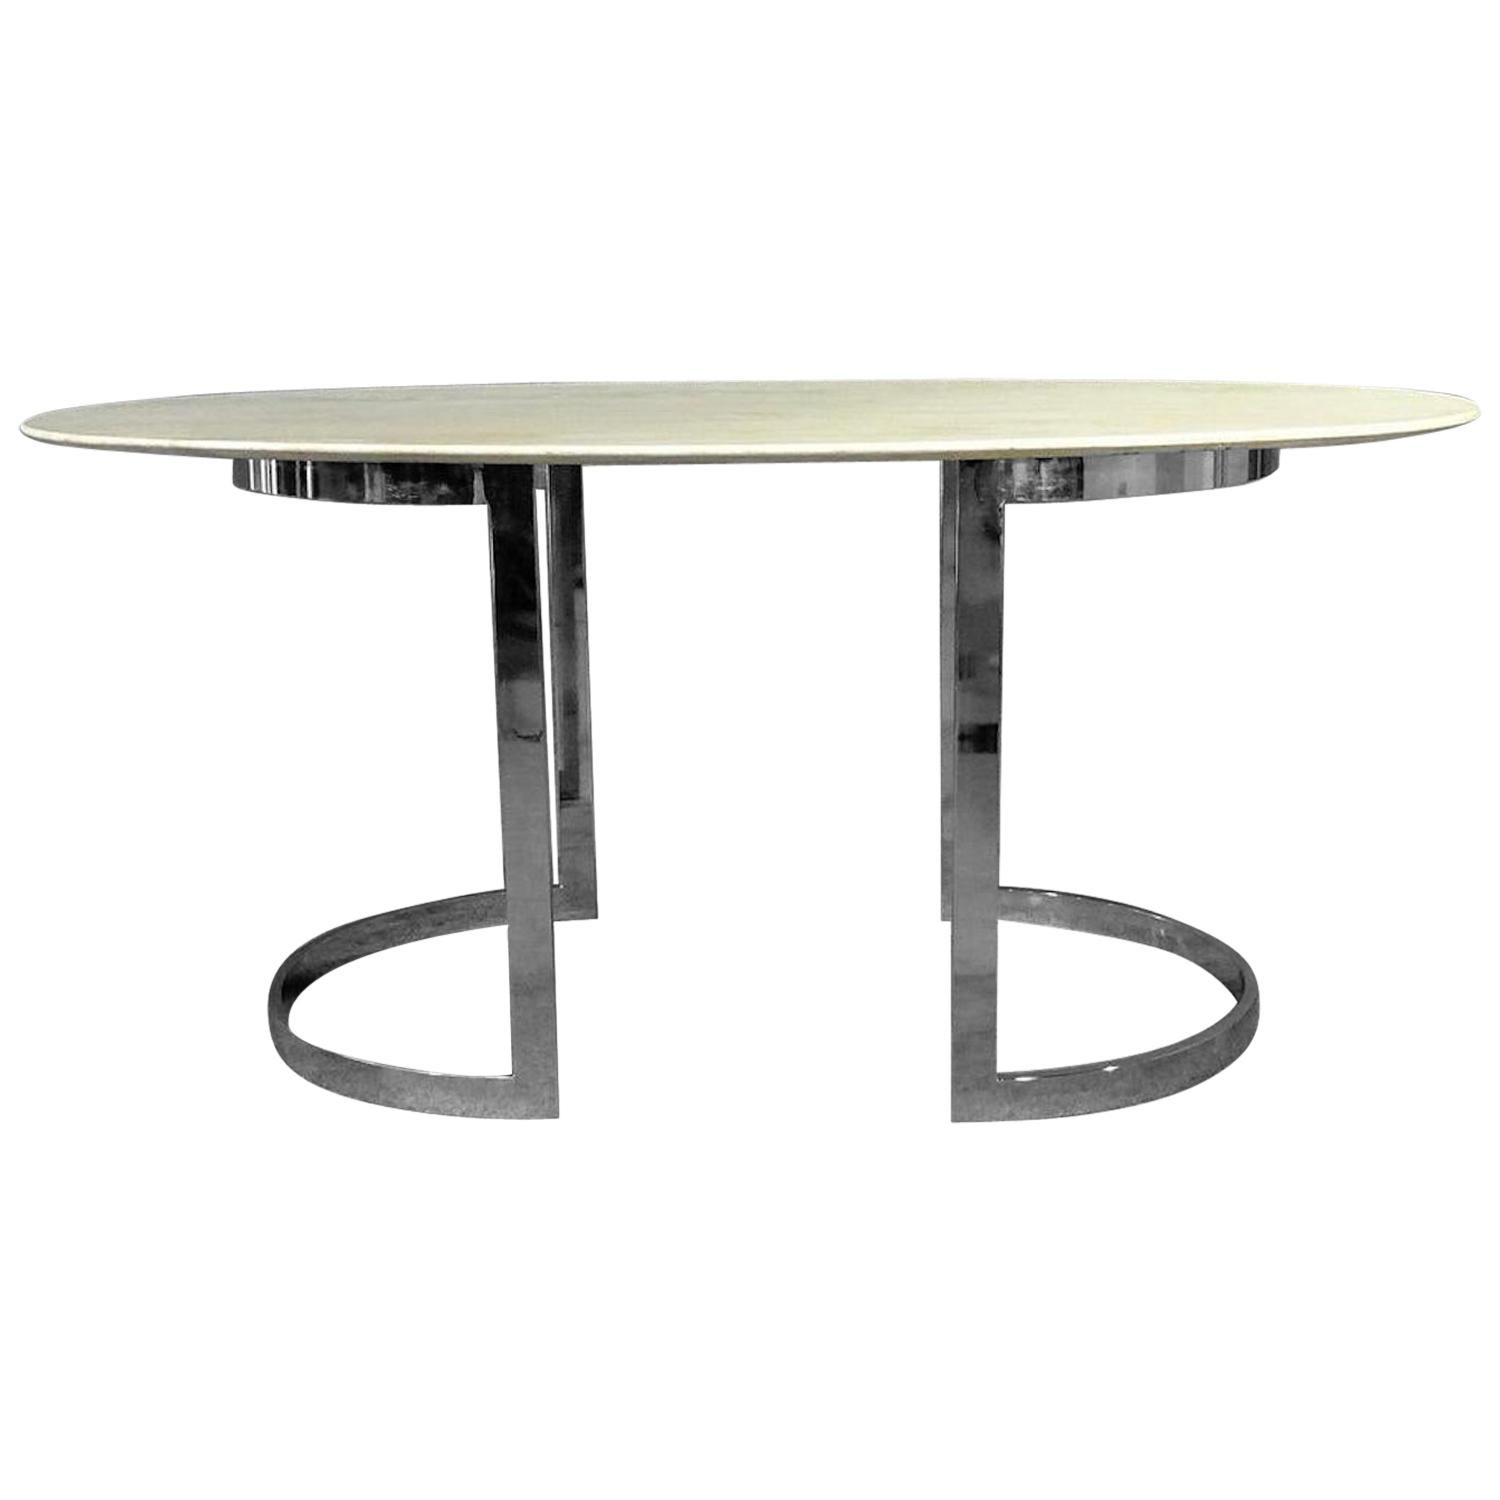 Oval Stone Top Dining Table